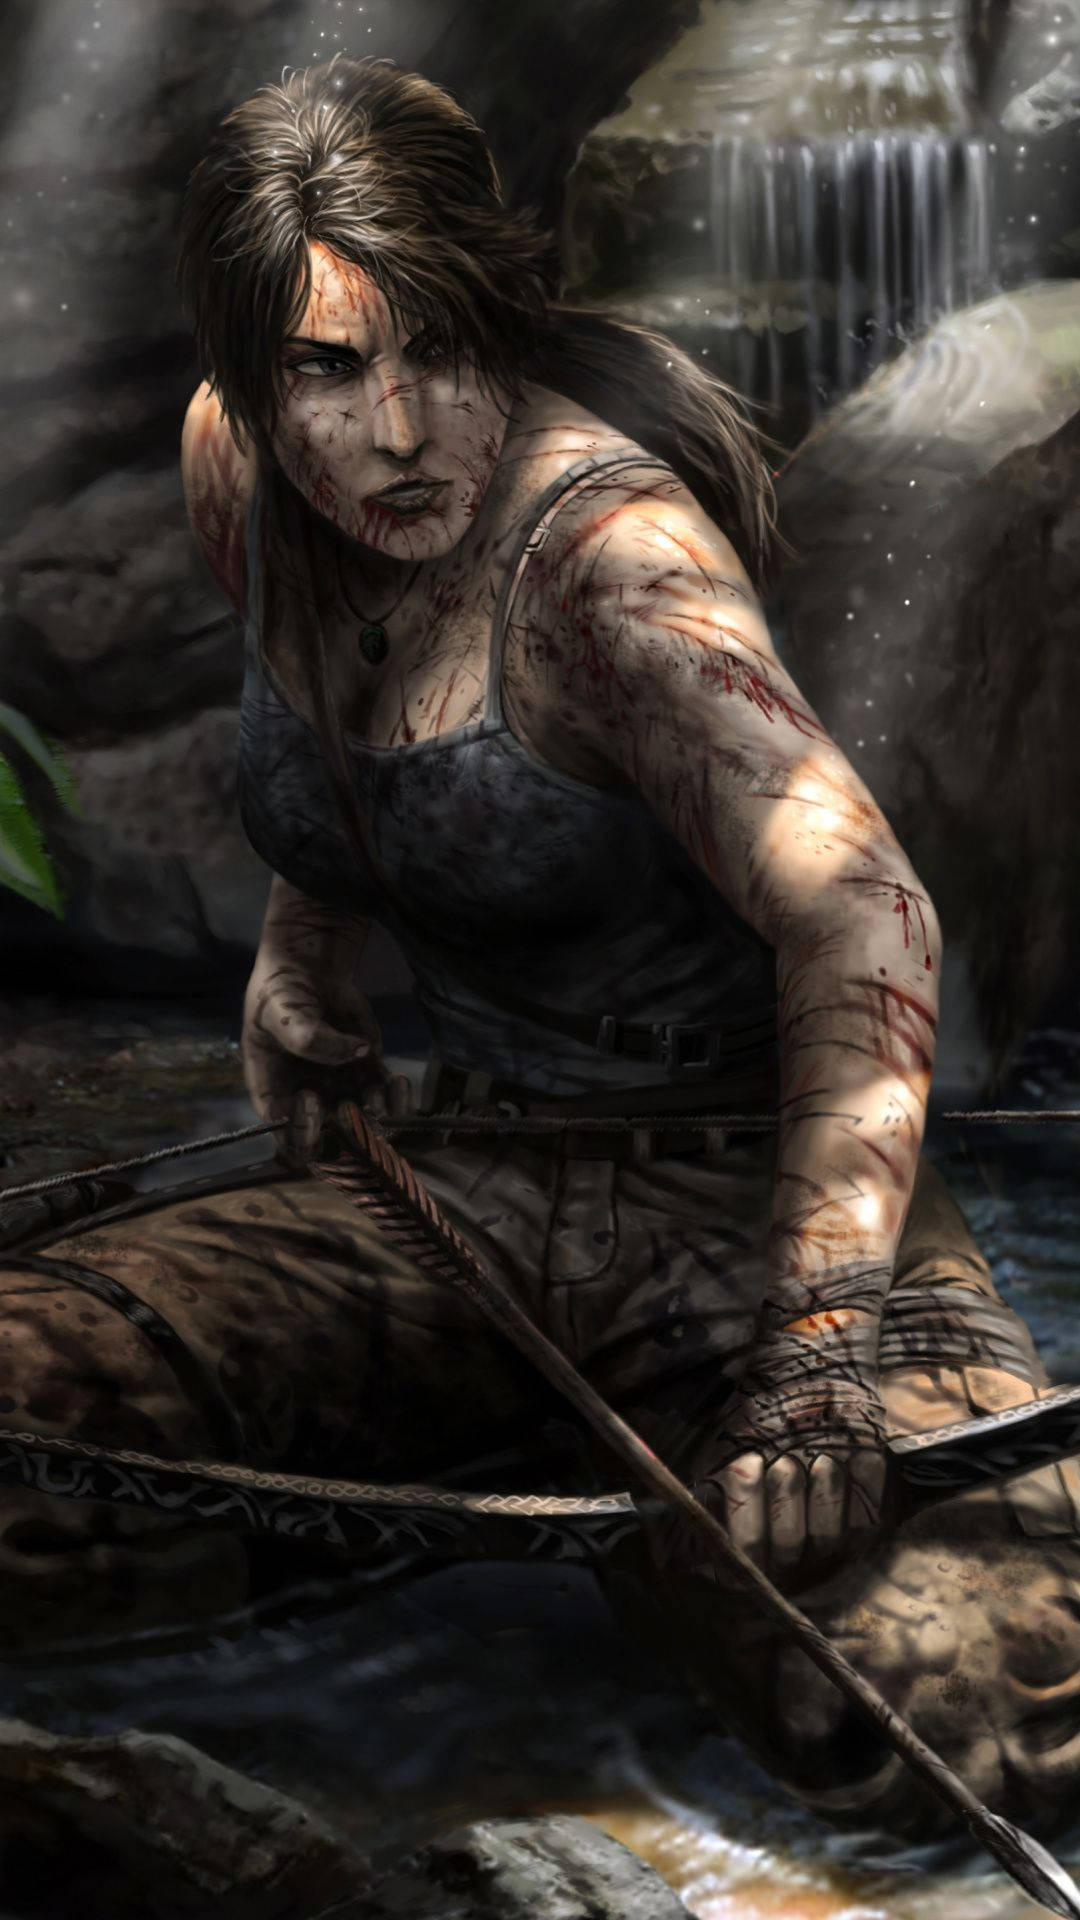 An Action-Packed Adventure Awaits in Tomb Raider 9 Wallpaper